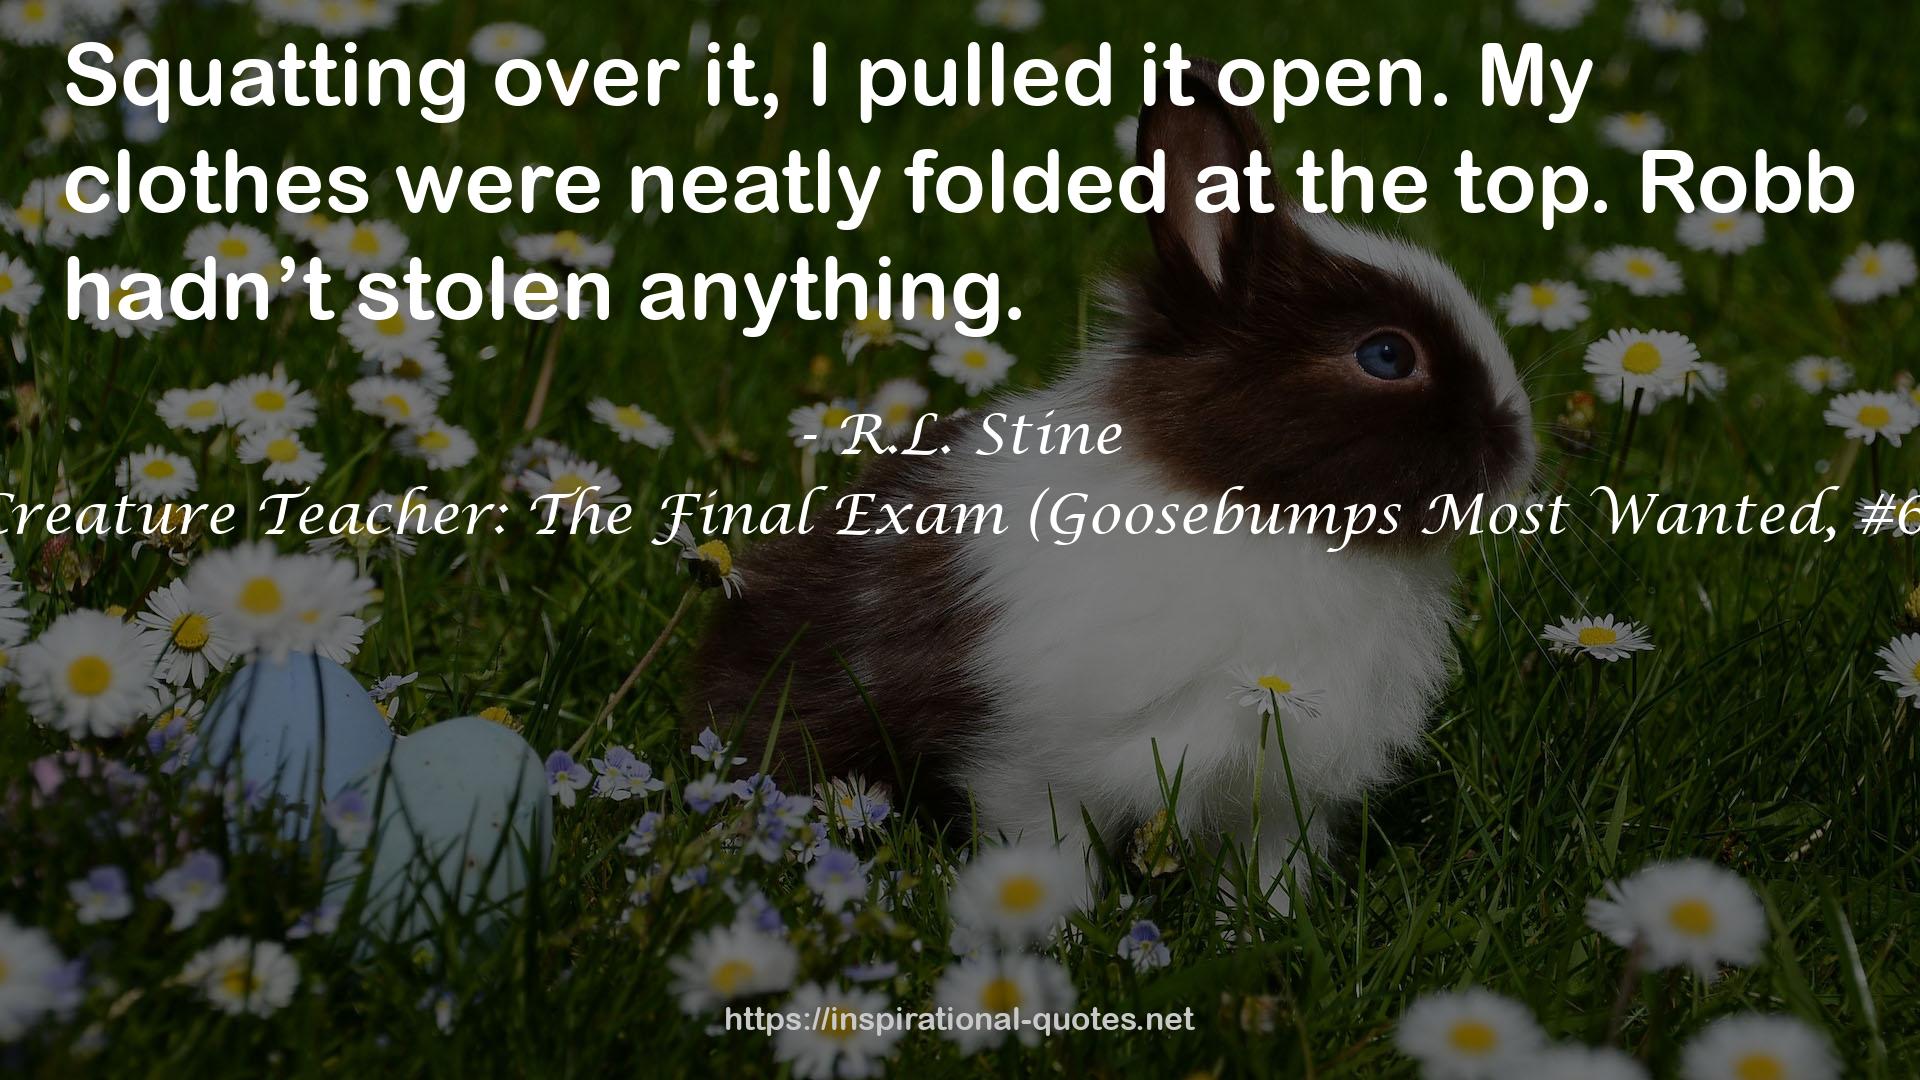 Creature Teacher: The Final Exam (Goosebumps Most Wanted, #6) QUOTES